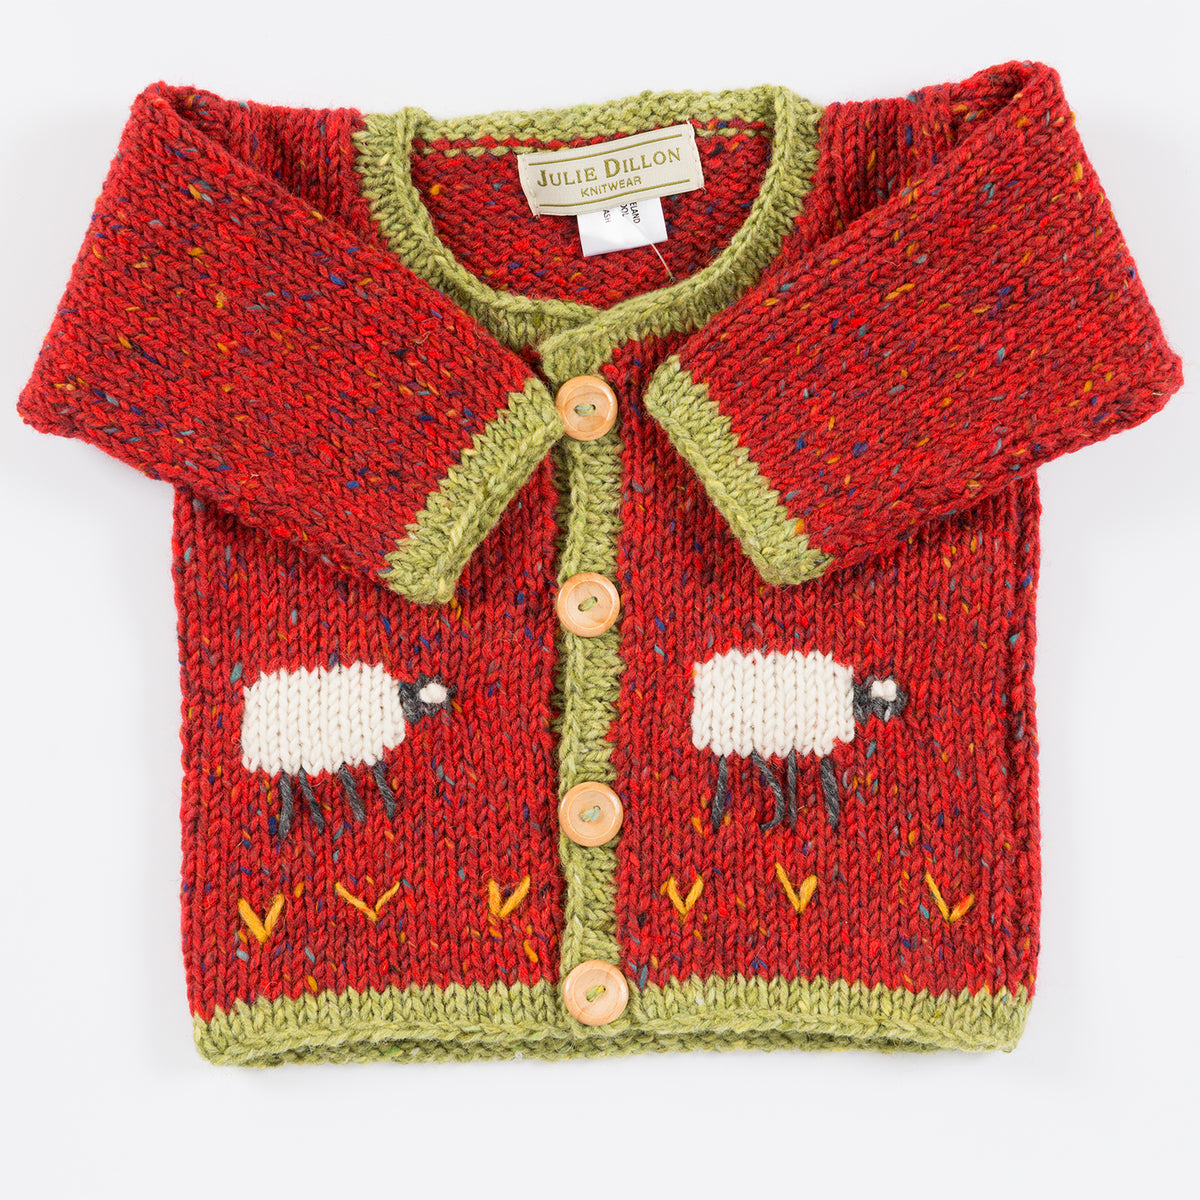 Handknitted Baby Cardigan - Red with Sheep motif